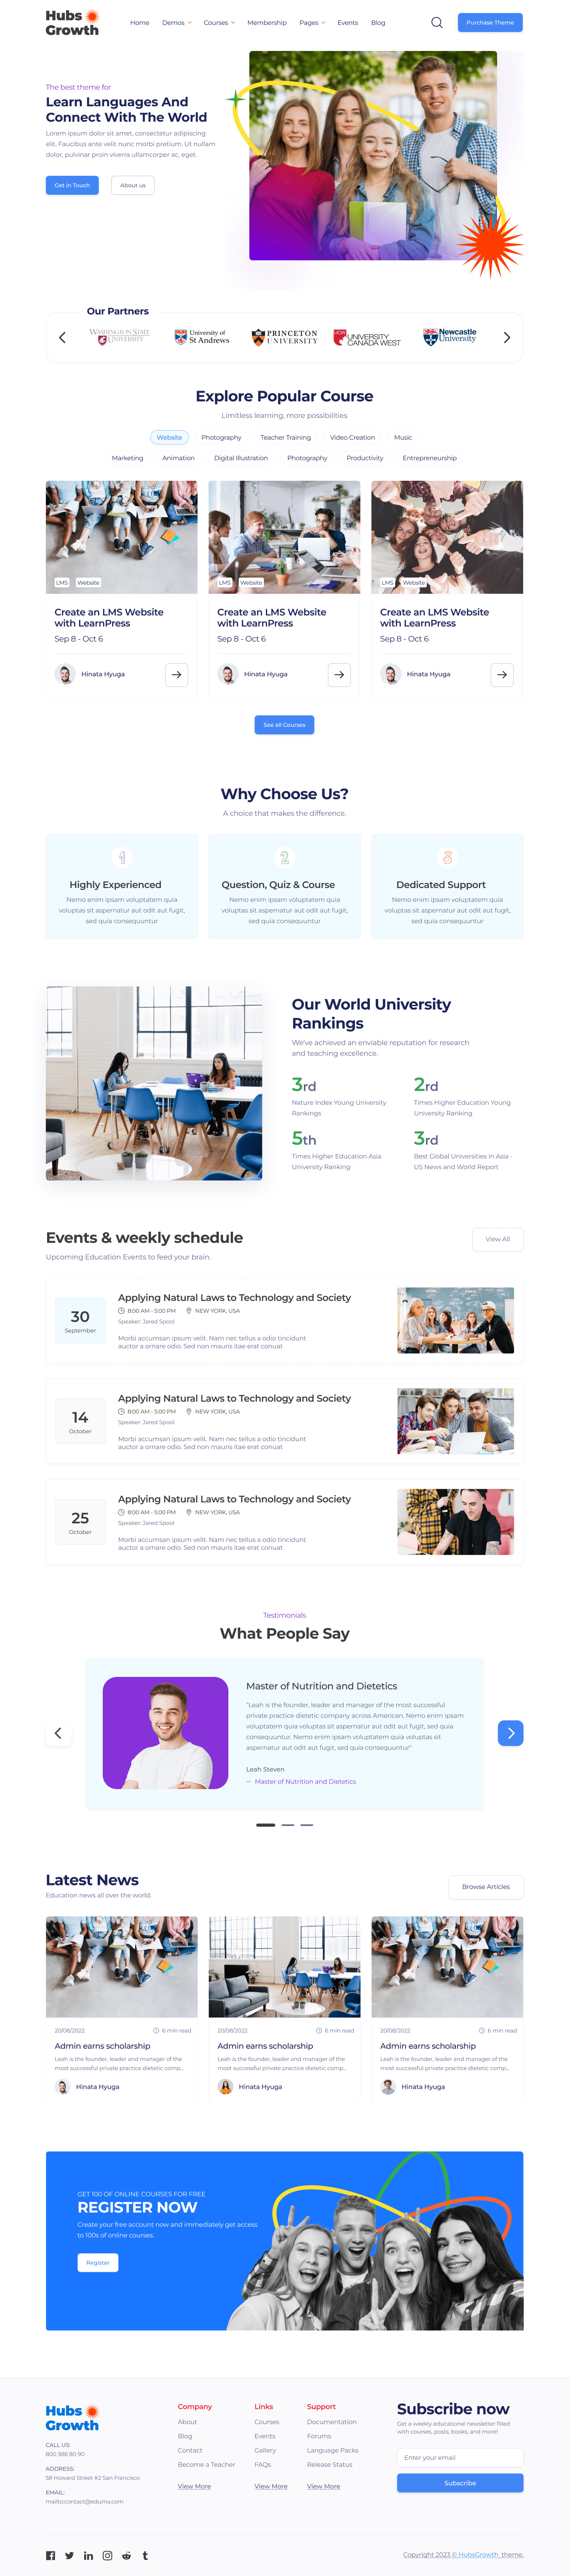 HubSy - HubSpot Theme for Education